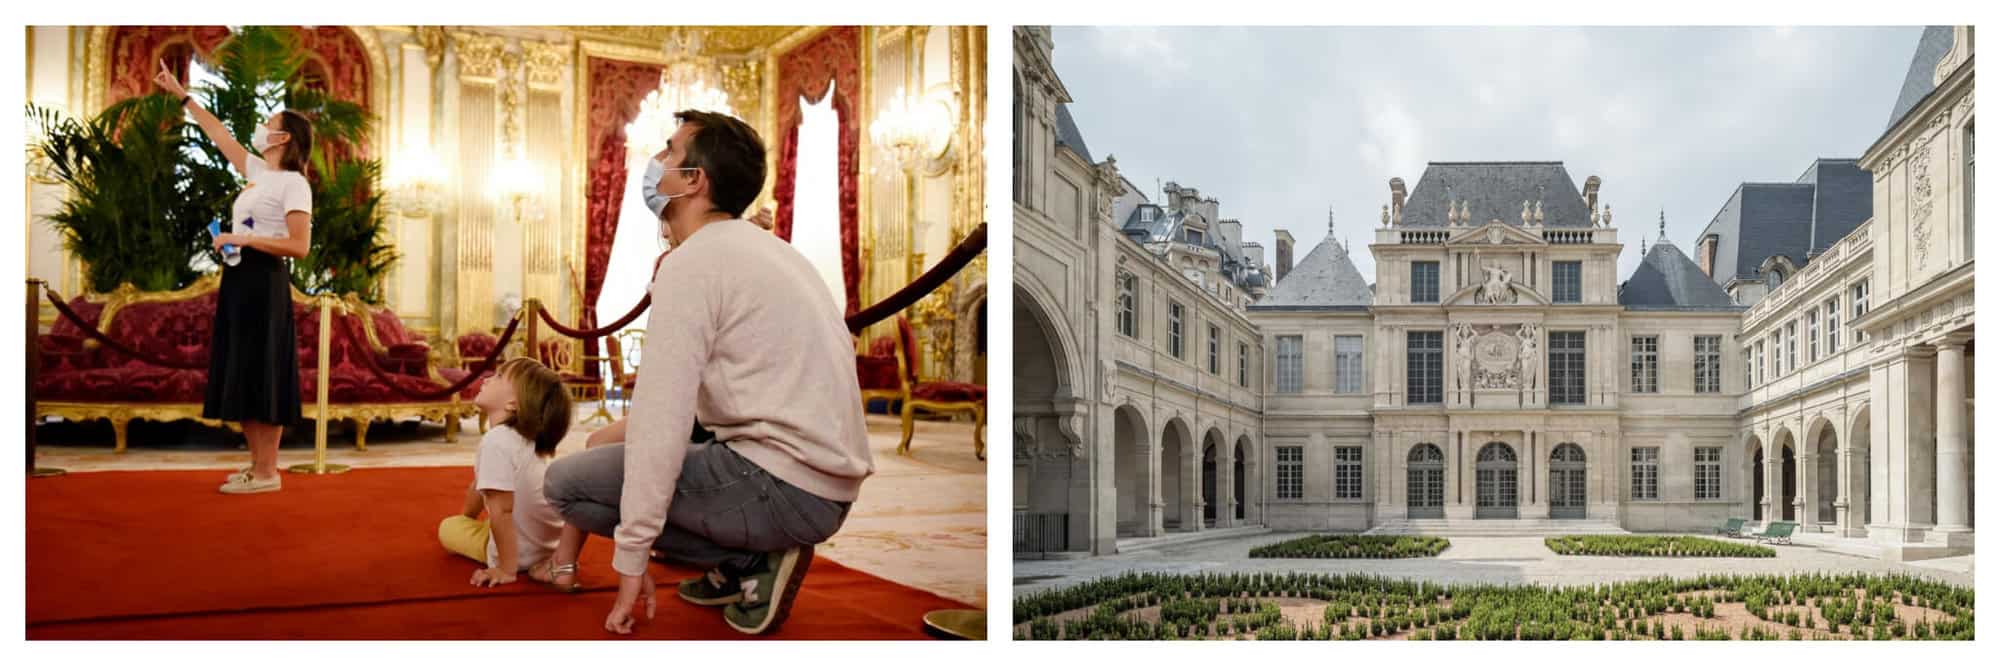 Left: a woman pointing at something inside Musee du Louvre, a child sitting on the ground and a man knelt beside him look where she is pointing. Right: the exterior facade of Musee Carnavalet. 